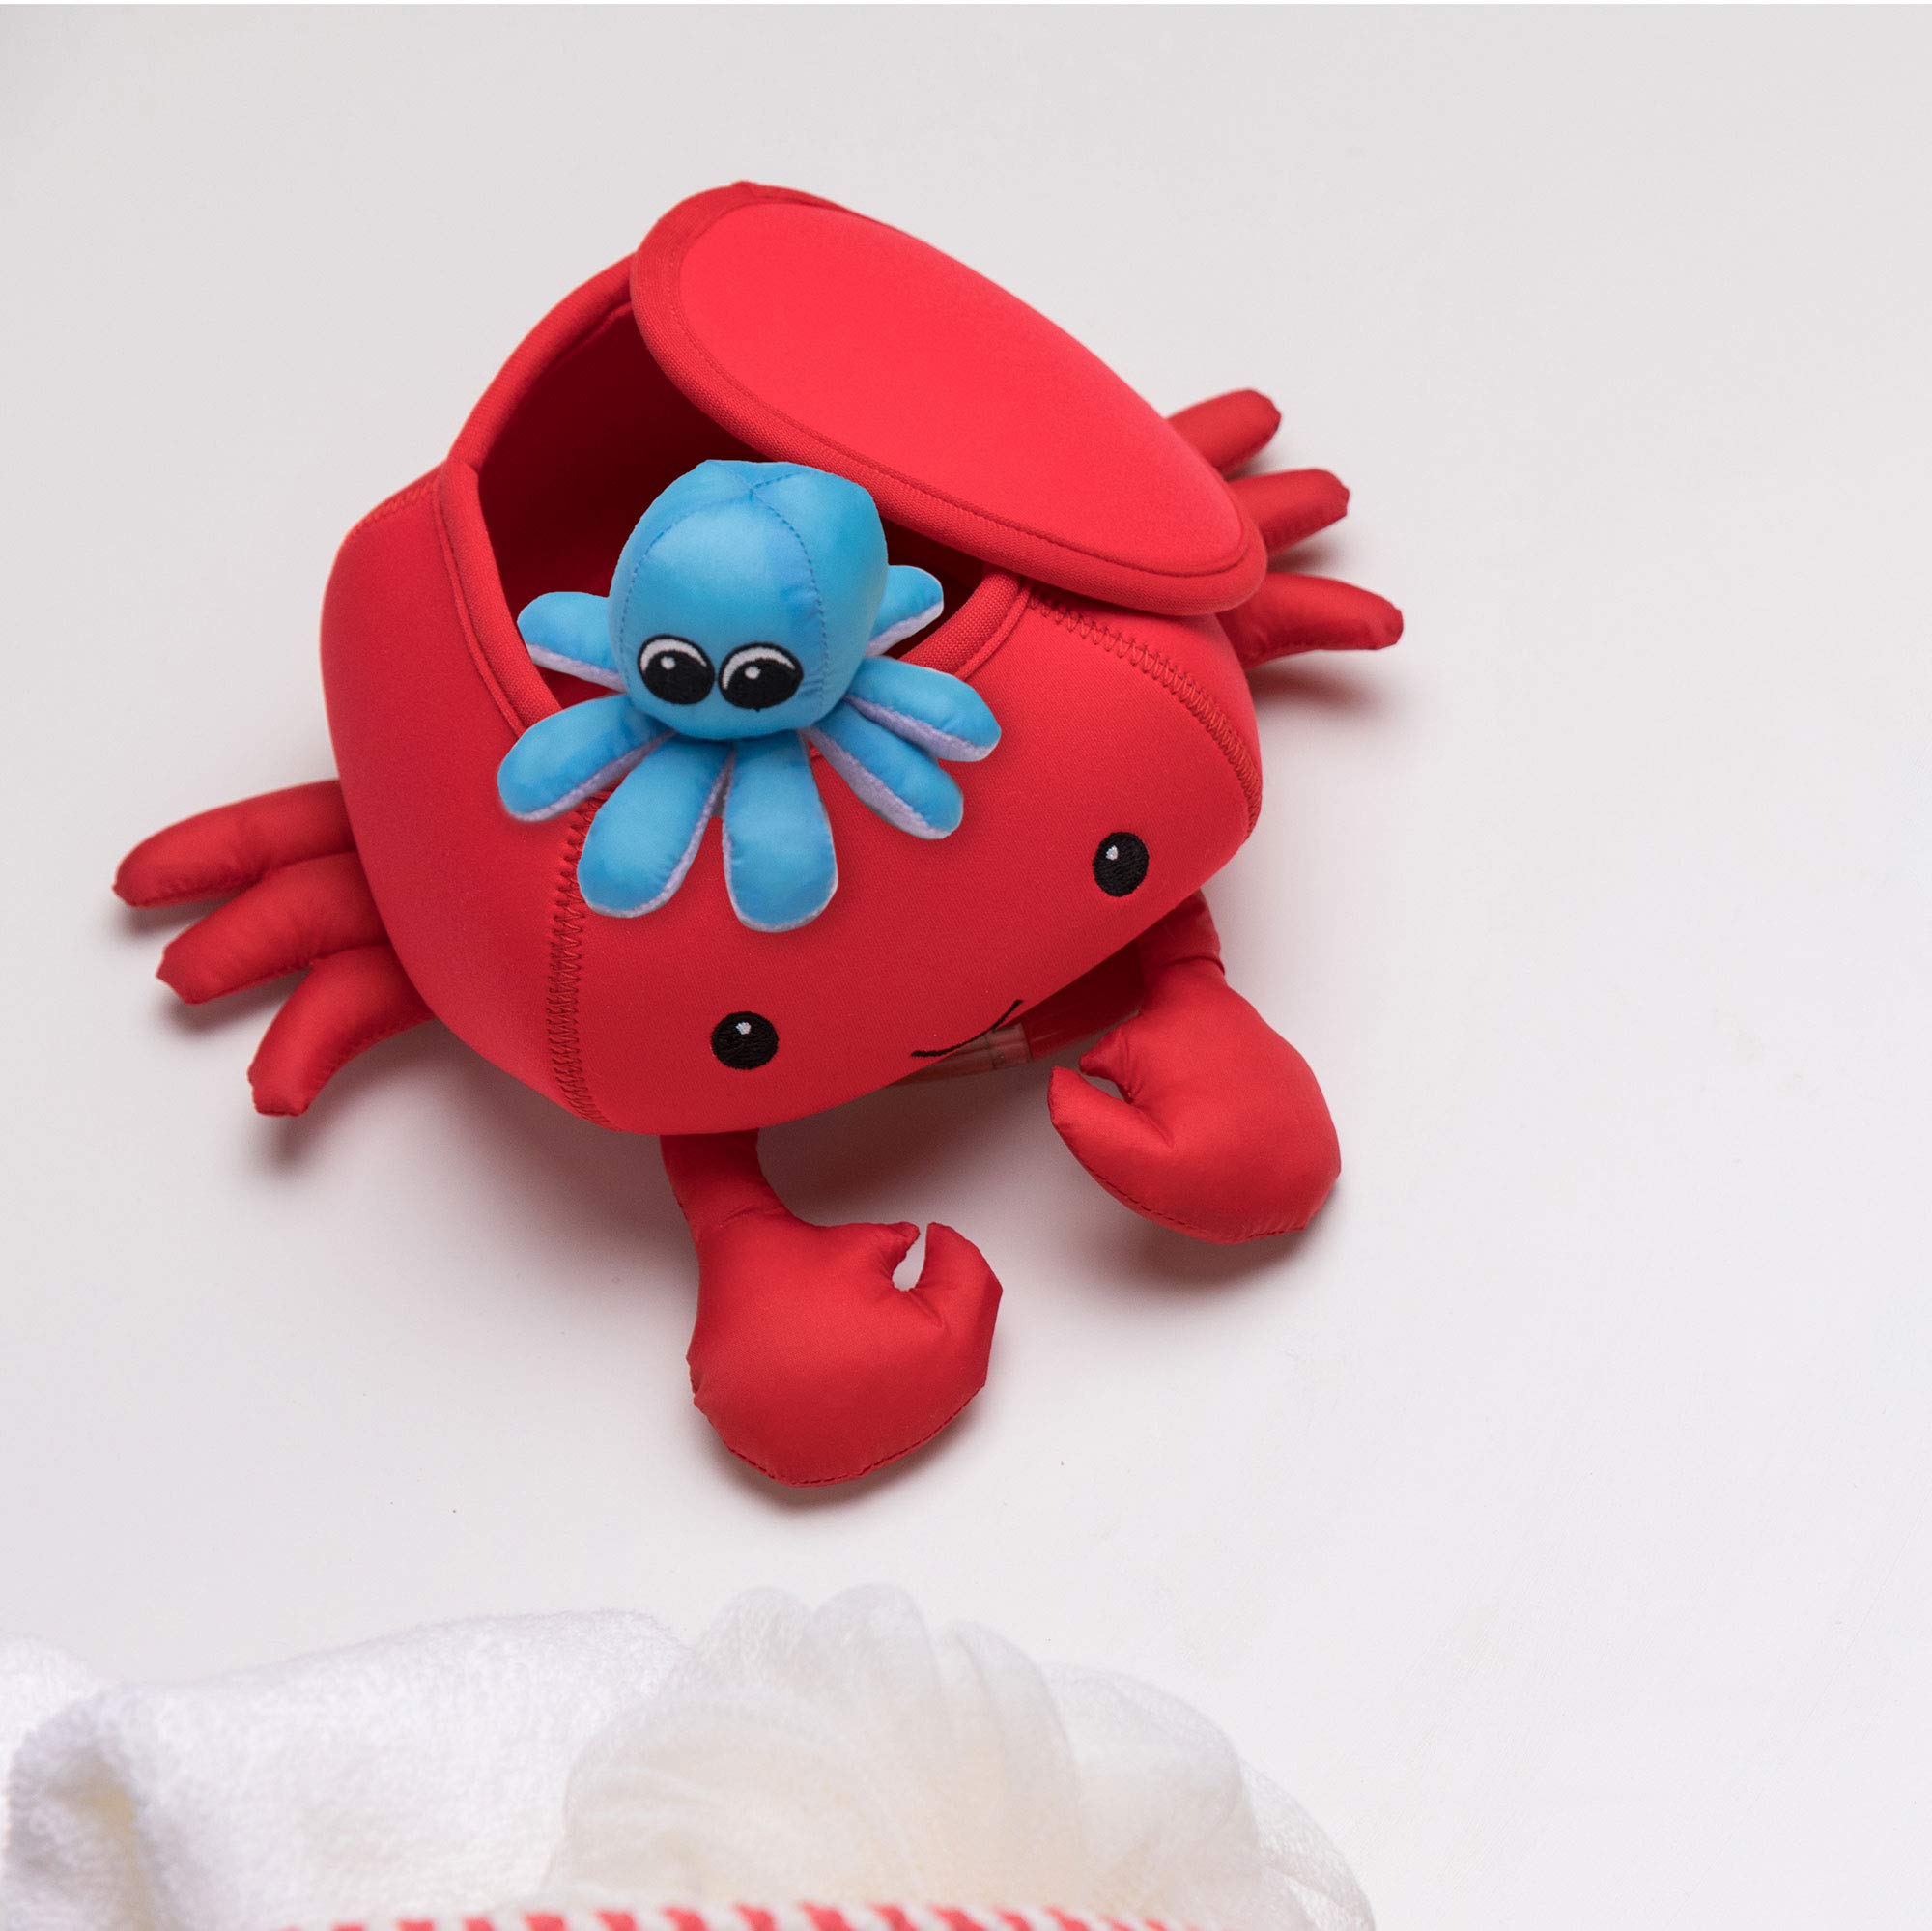 Manhattan Toy Neoprene Crab 5-Piece Floating Spill n Fill Bath Toy with Quick Dry Sponges and Squirt Toy